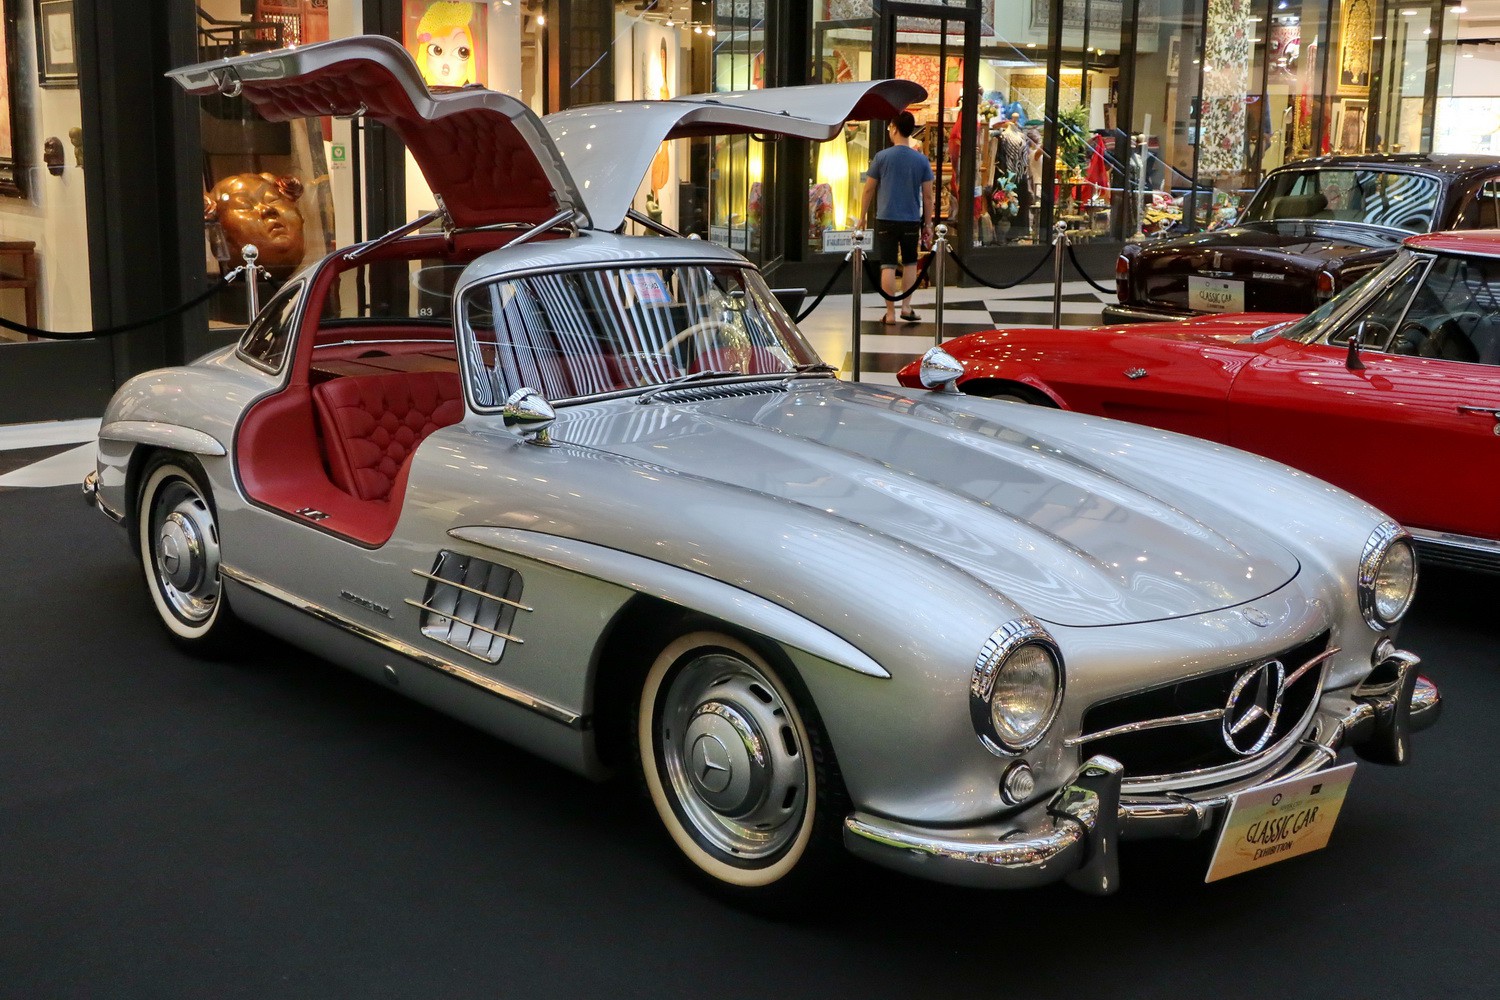 Mercedes Benz 300 SL from 1955 in the River City Shopping Complex